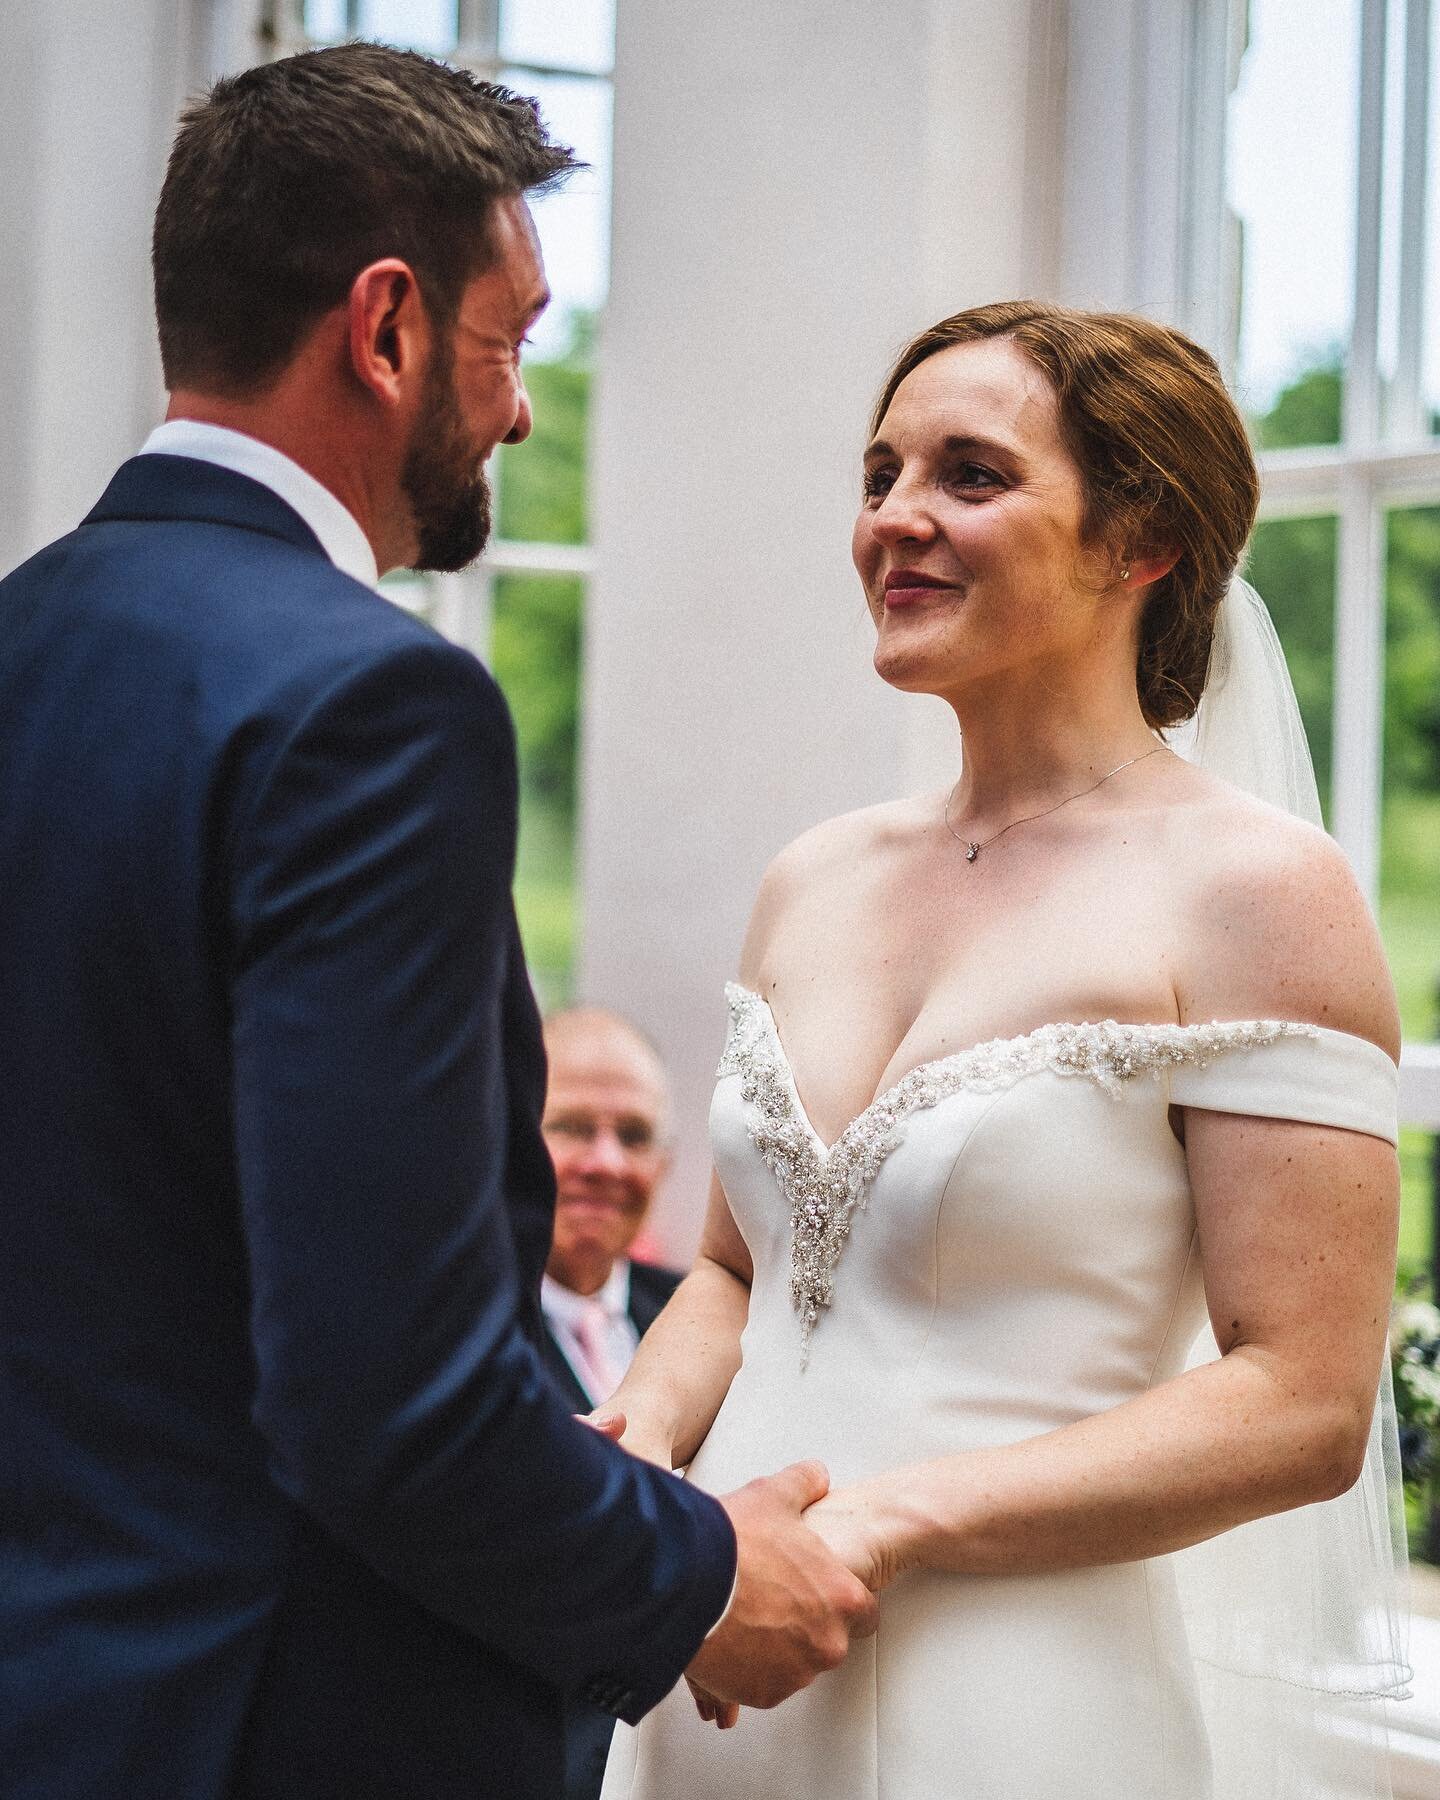 H + D | @kelmarshhallweddings 
.
.
.
A stunning wedding day for Harriet and Dan at Kelmarsh Hall&rsquo;s orangery back in the spring of this year. Here&rsquo;s some images throughout their lovely wedding day! 

Harriet and Dan had their wedding break